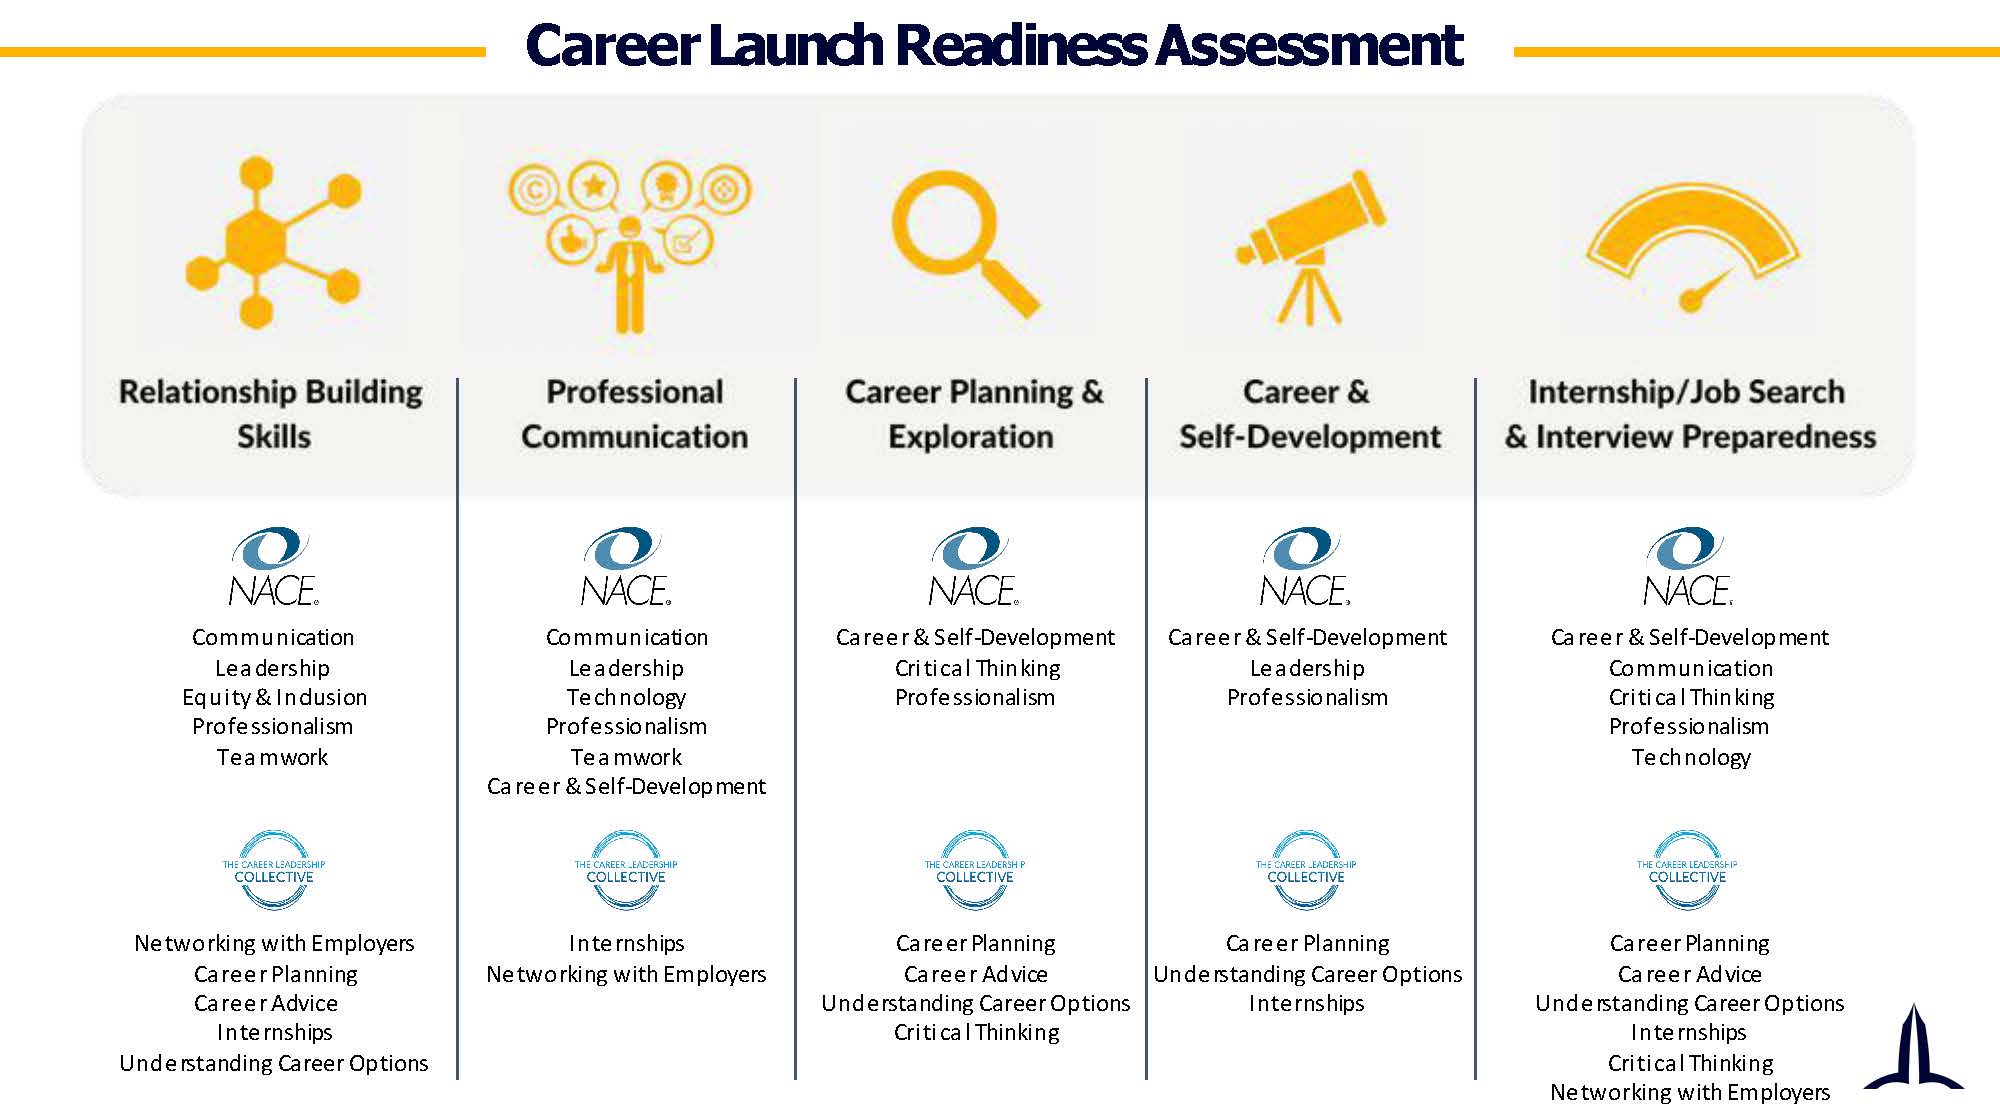 Career Launch Readiness Assessment Image